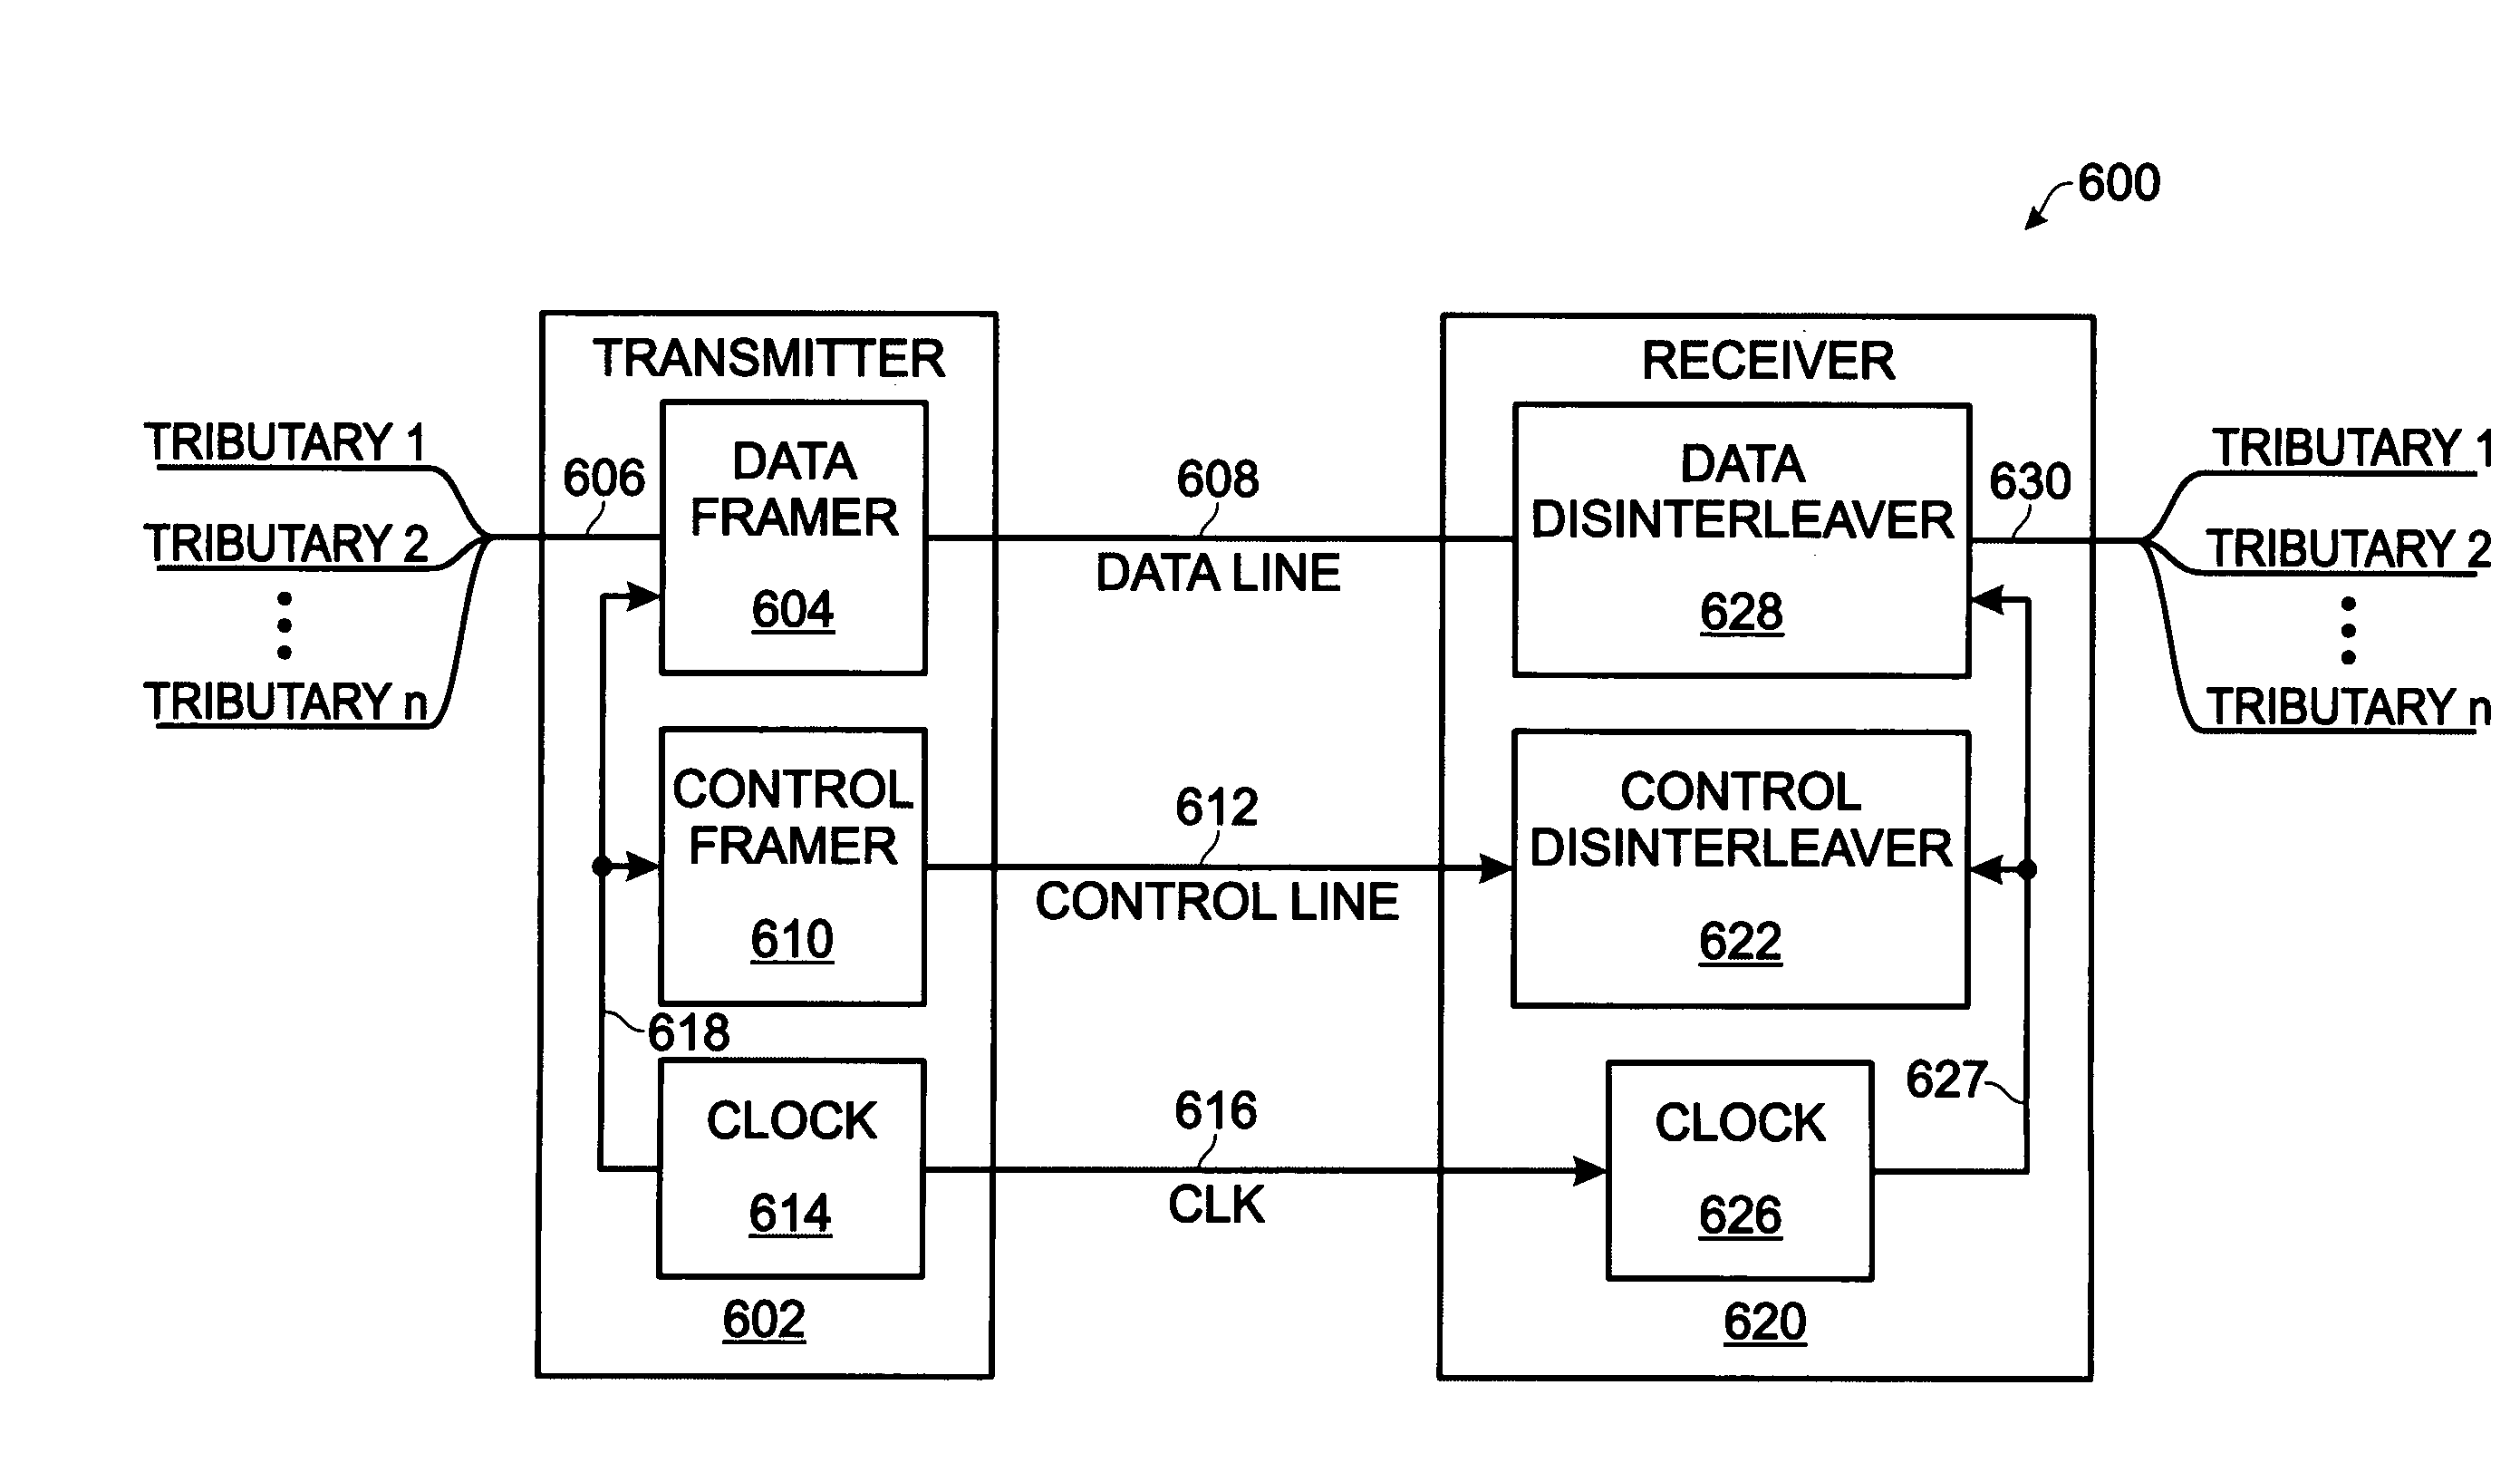 Flexible tributary interface with serial control line